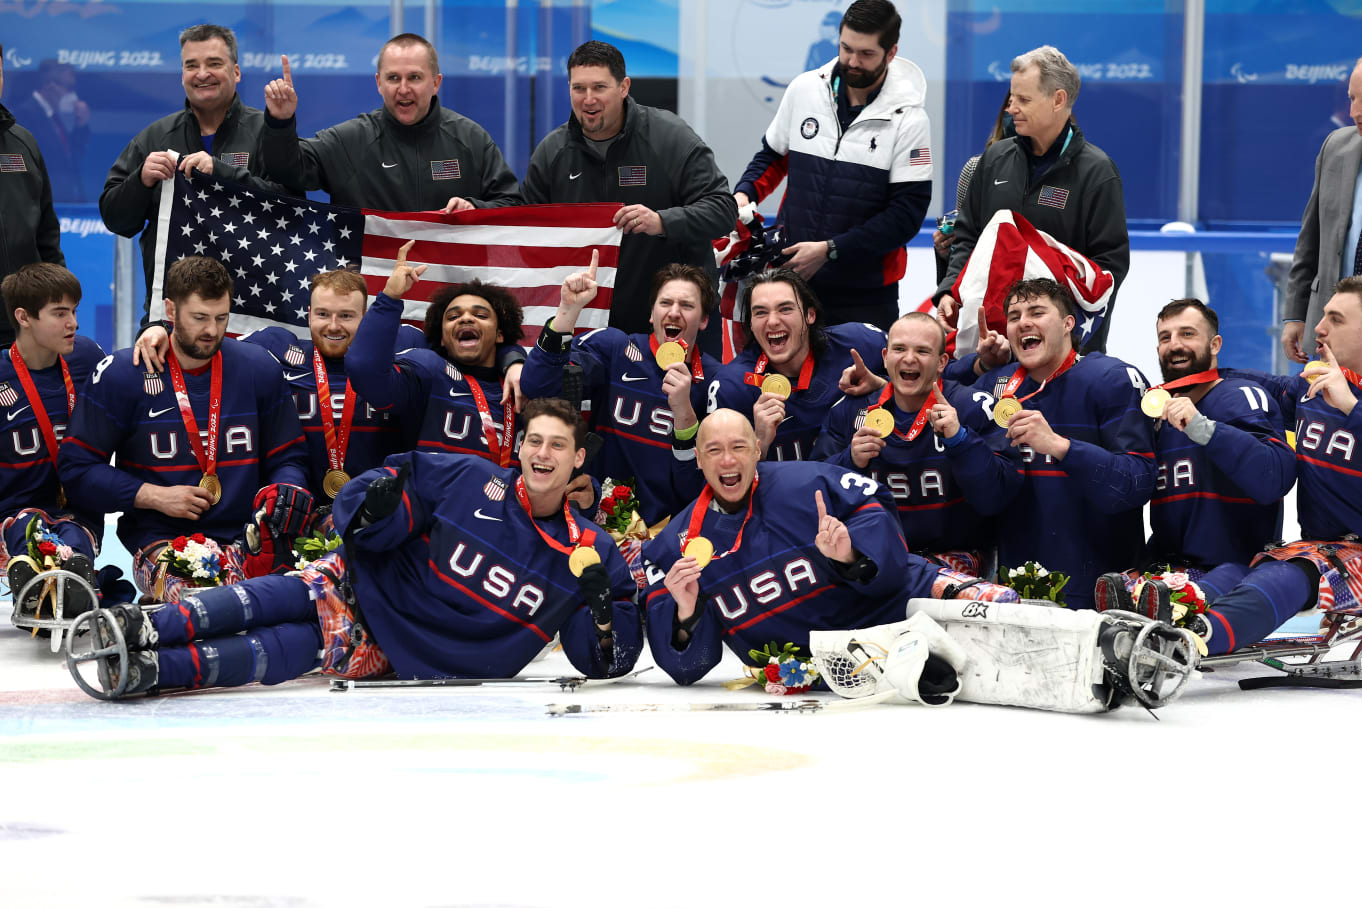 Gold medal winners Team USA celebrate during the Para Ice Hockey medal ceremony at the Beijing 2022 Winter Paralympics